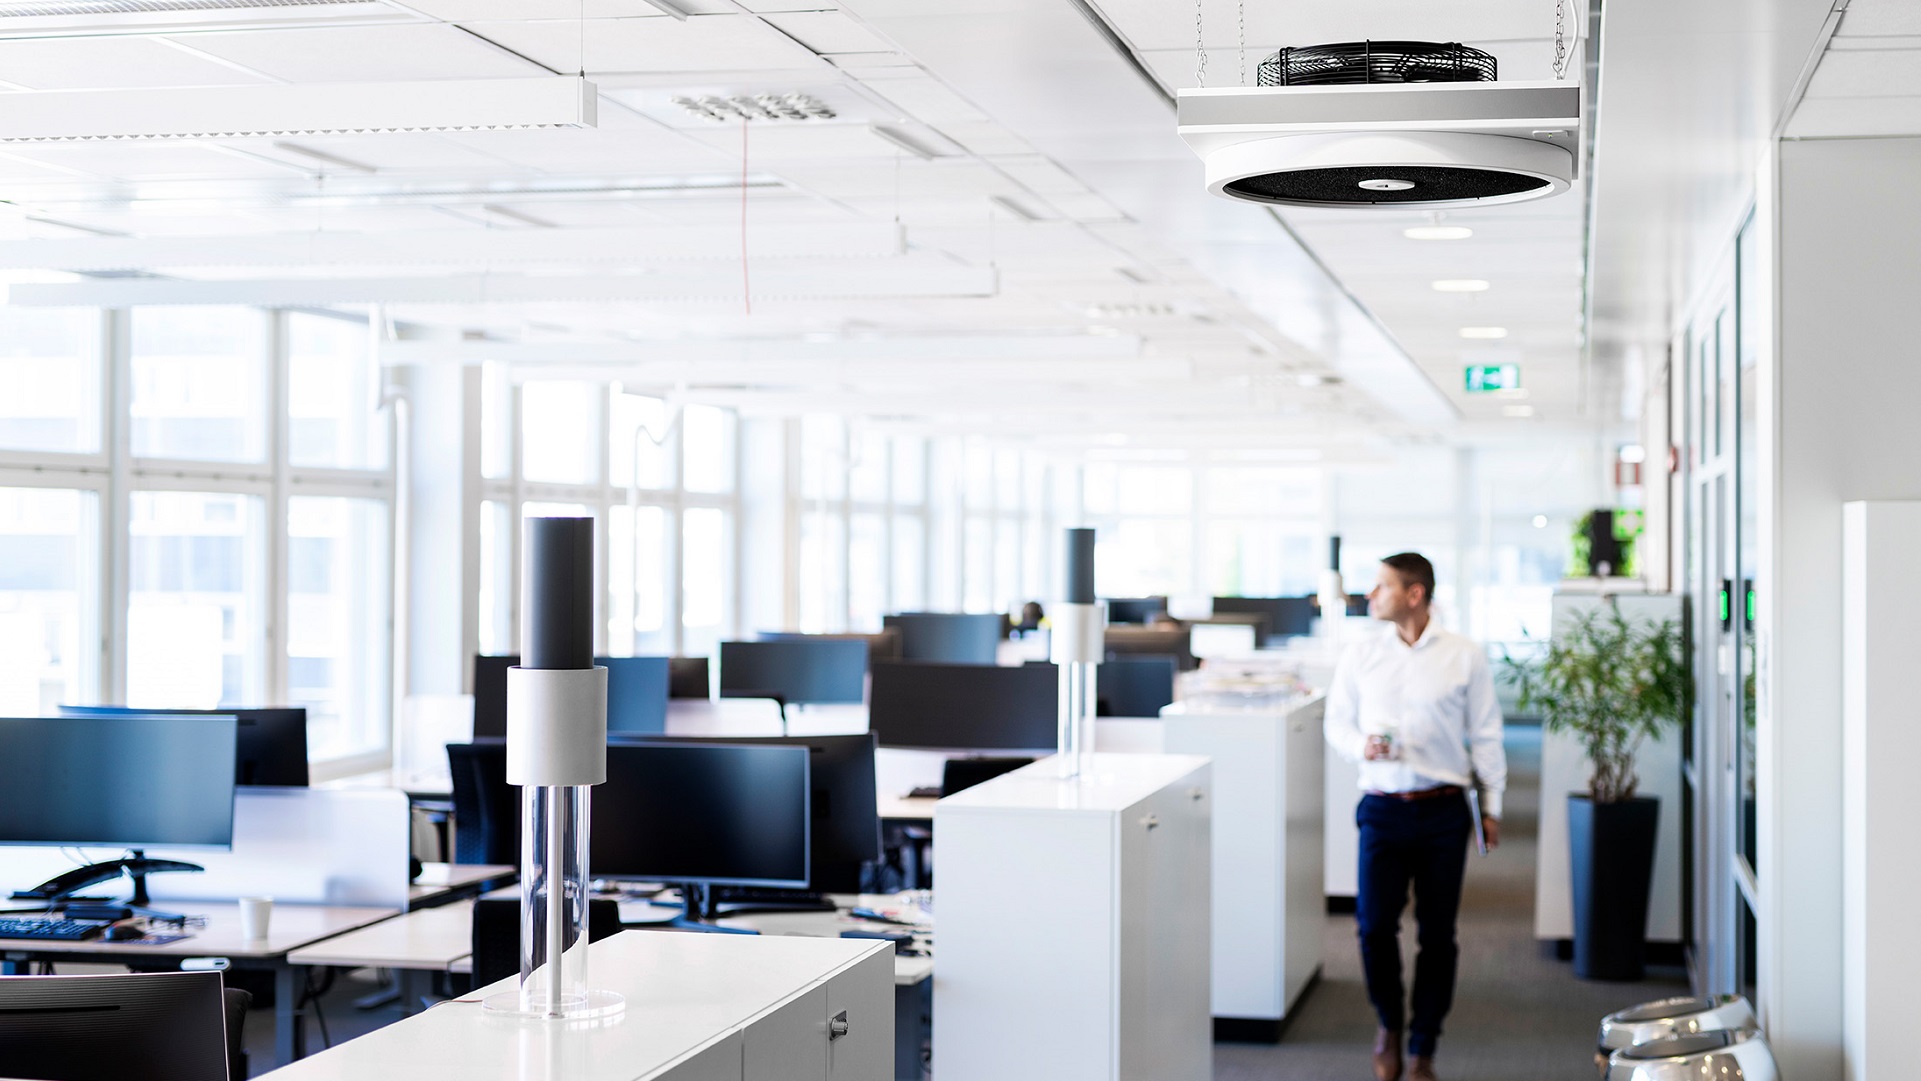 Coor provides a better indoor climate when using air purifiers and virus inhibitors in the workplace  | Coor